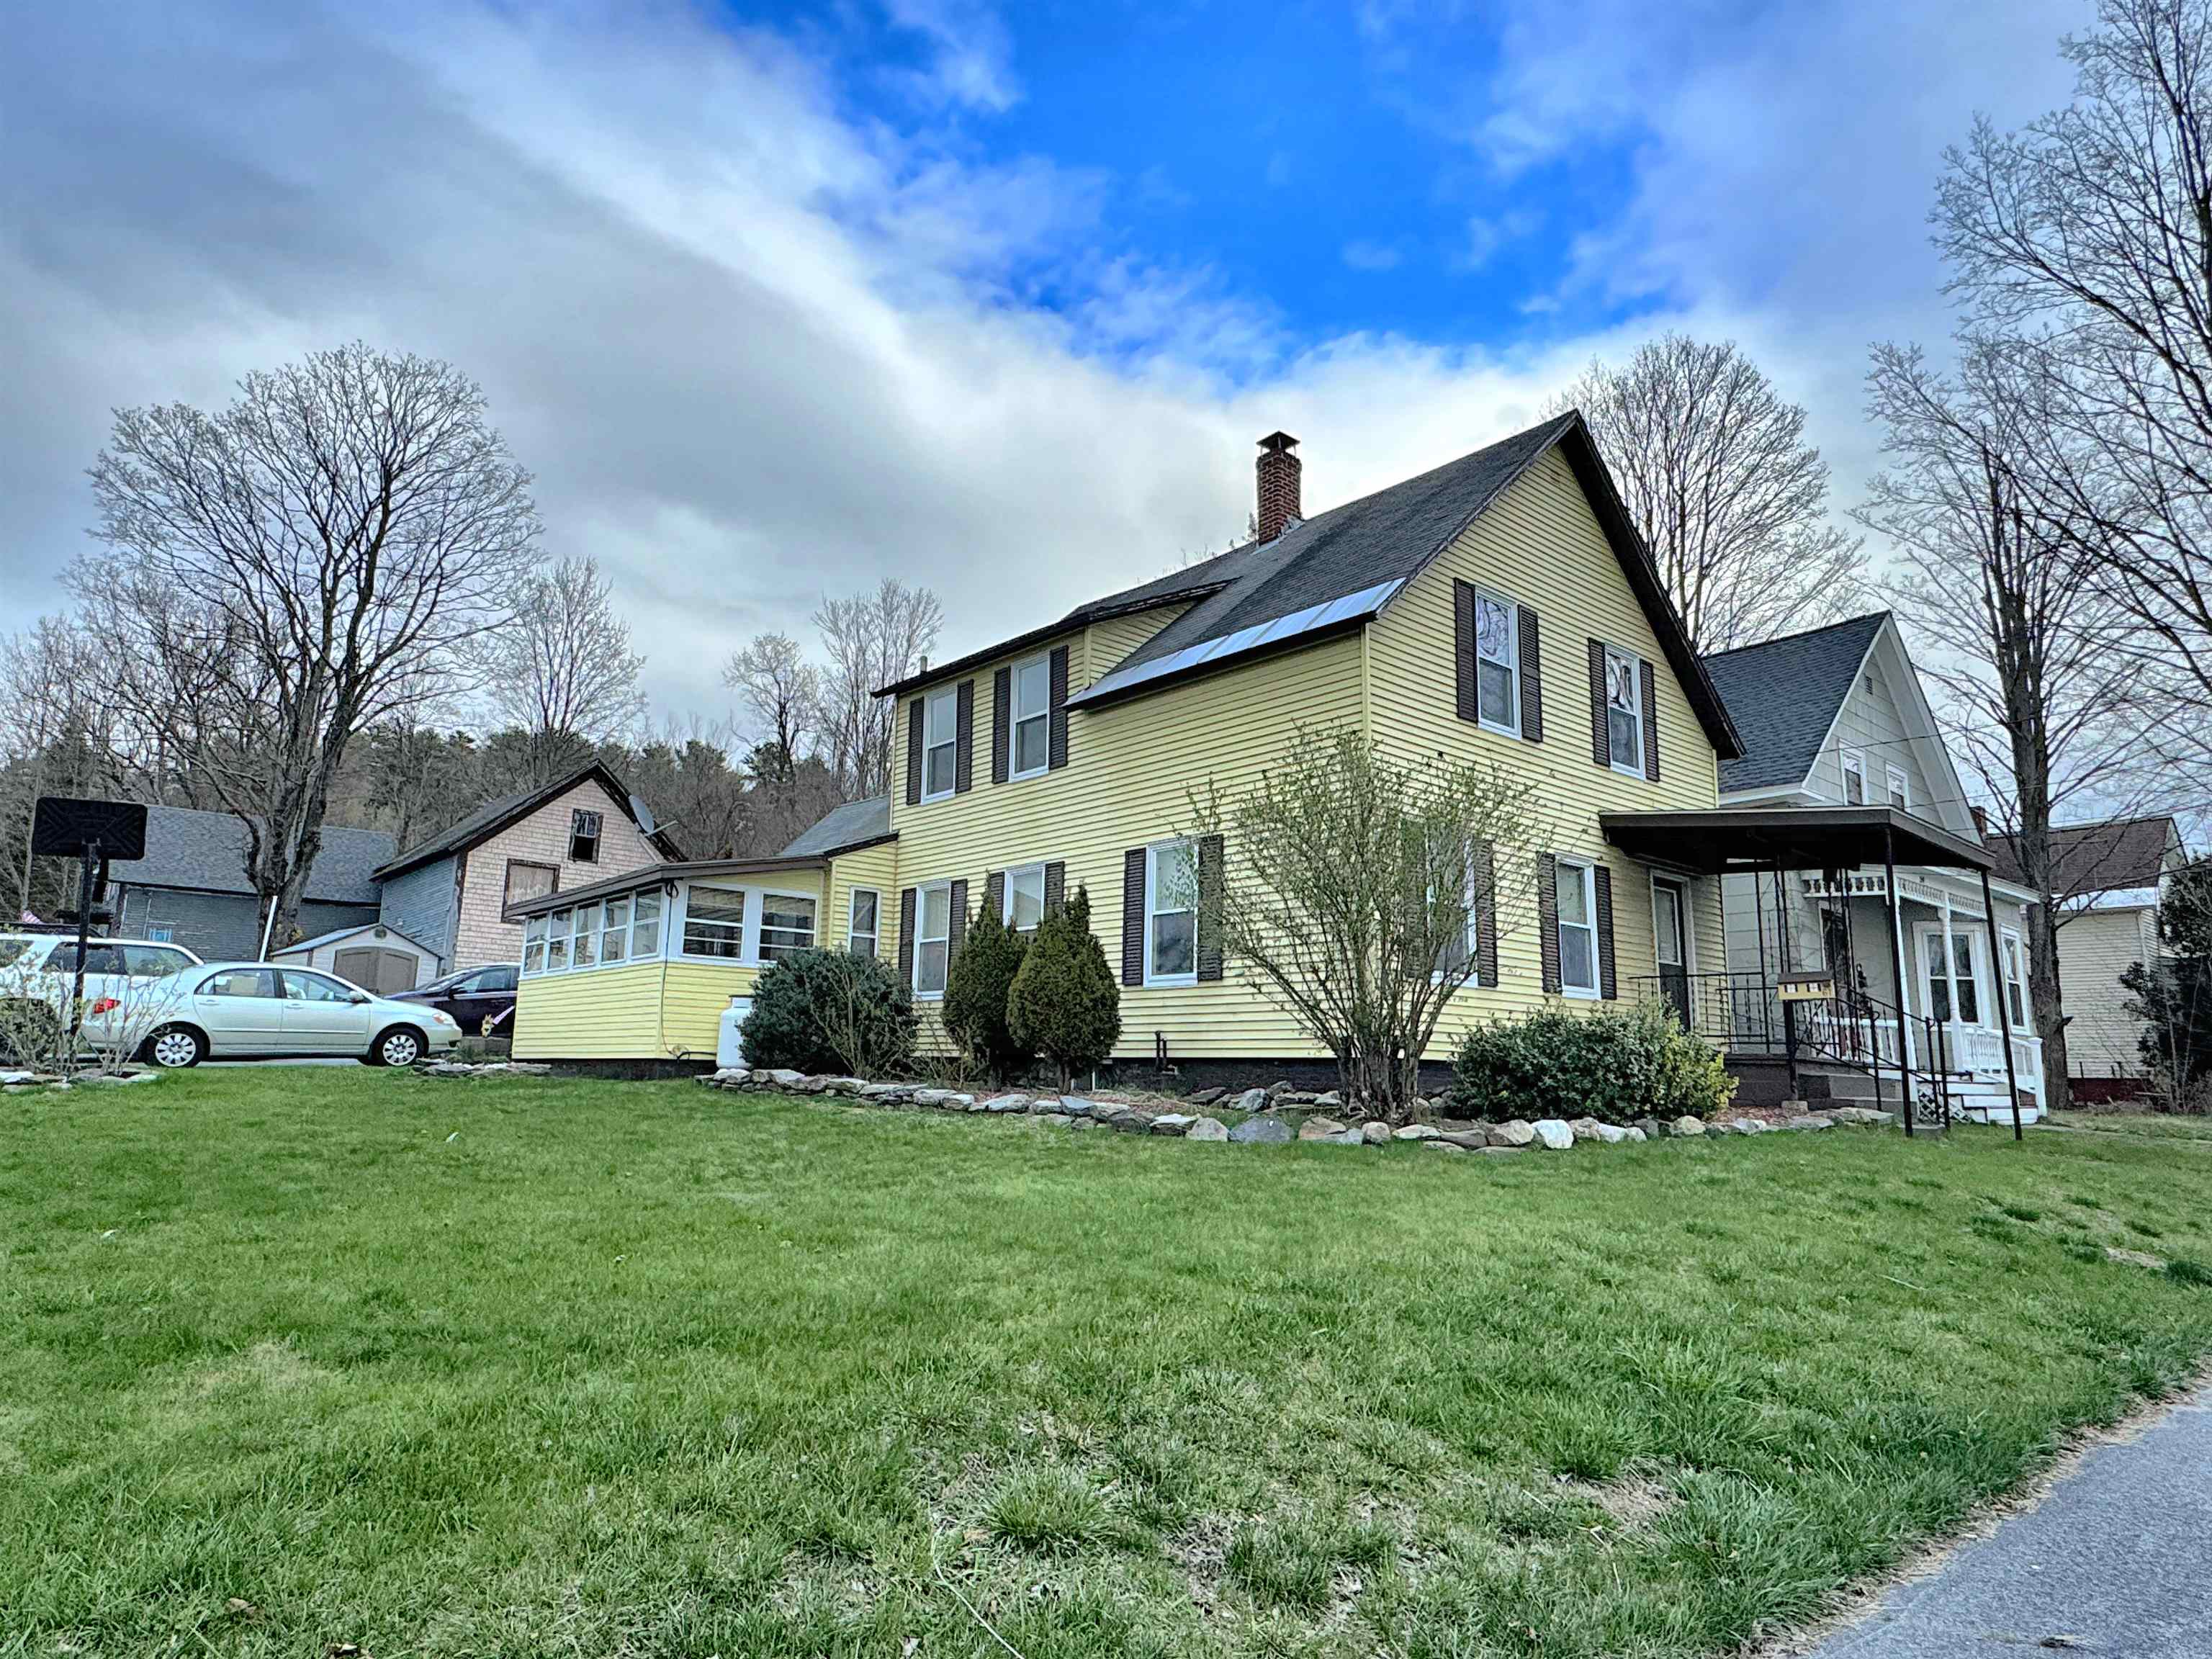 image of Claremont NH Home | sq.ft. 2991 